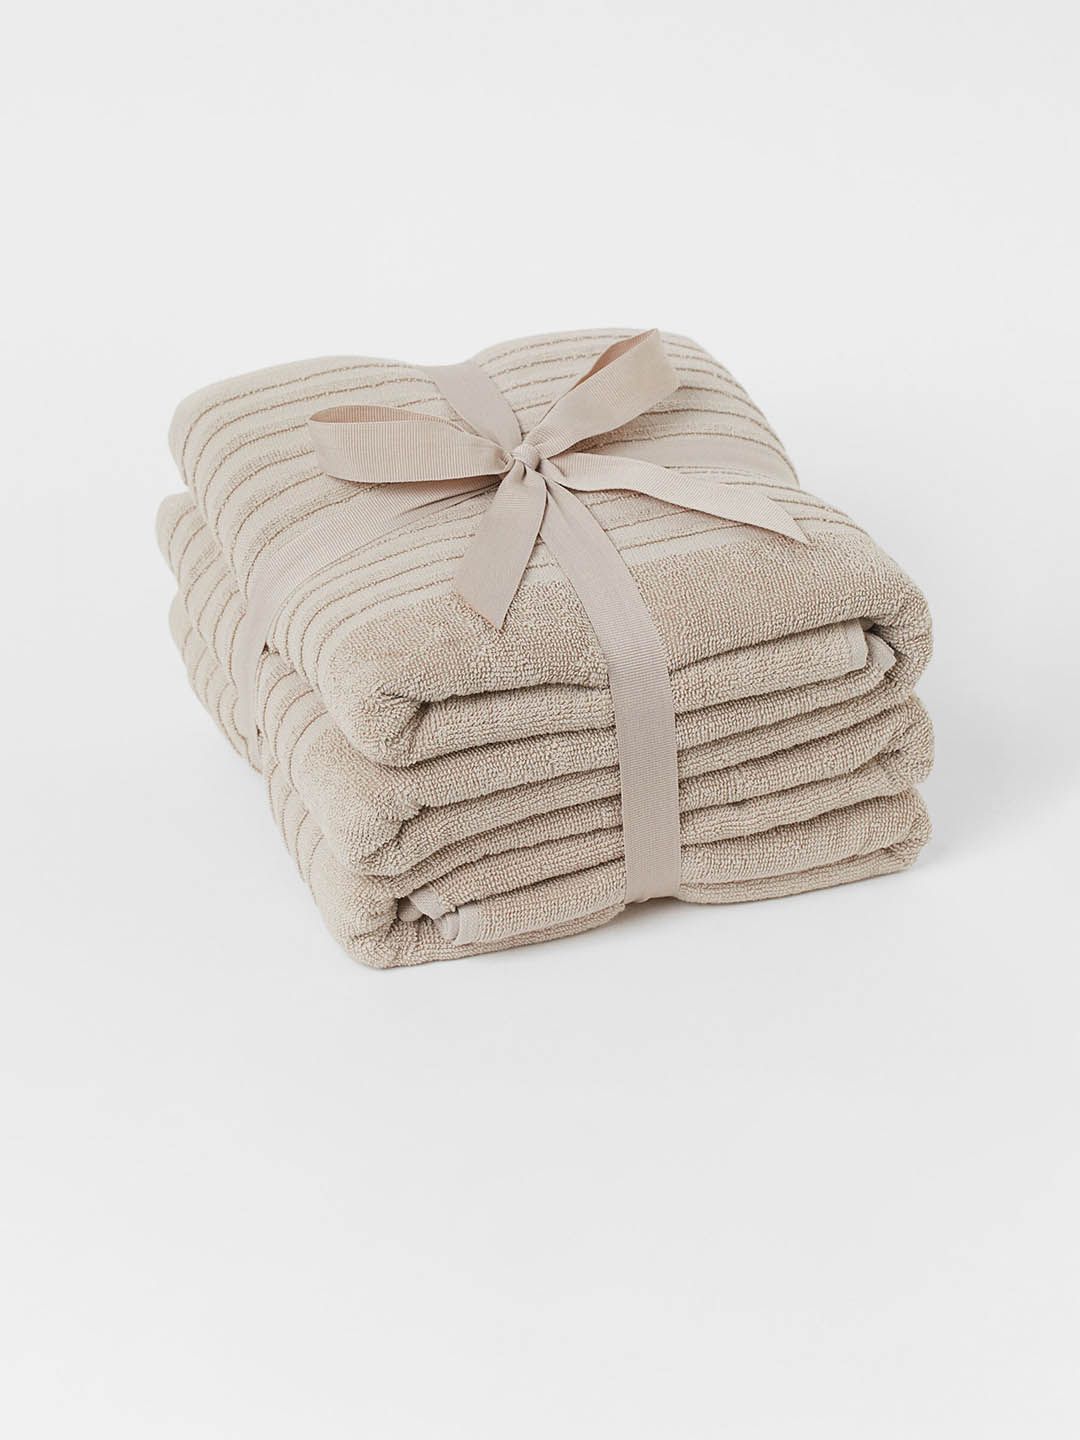 H&M Beige 2-pack Cotton Bath Sheets Price in India